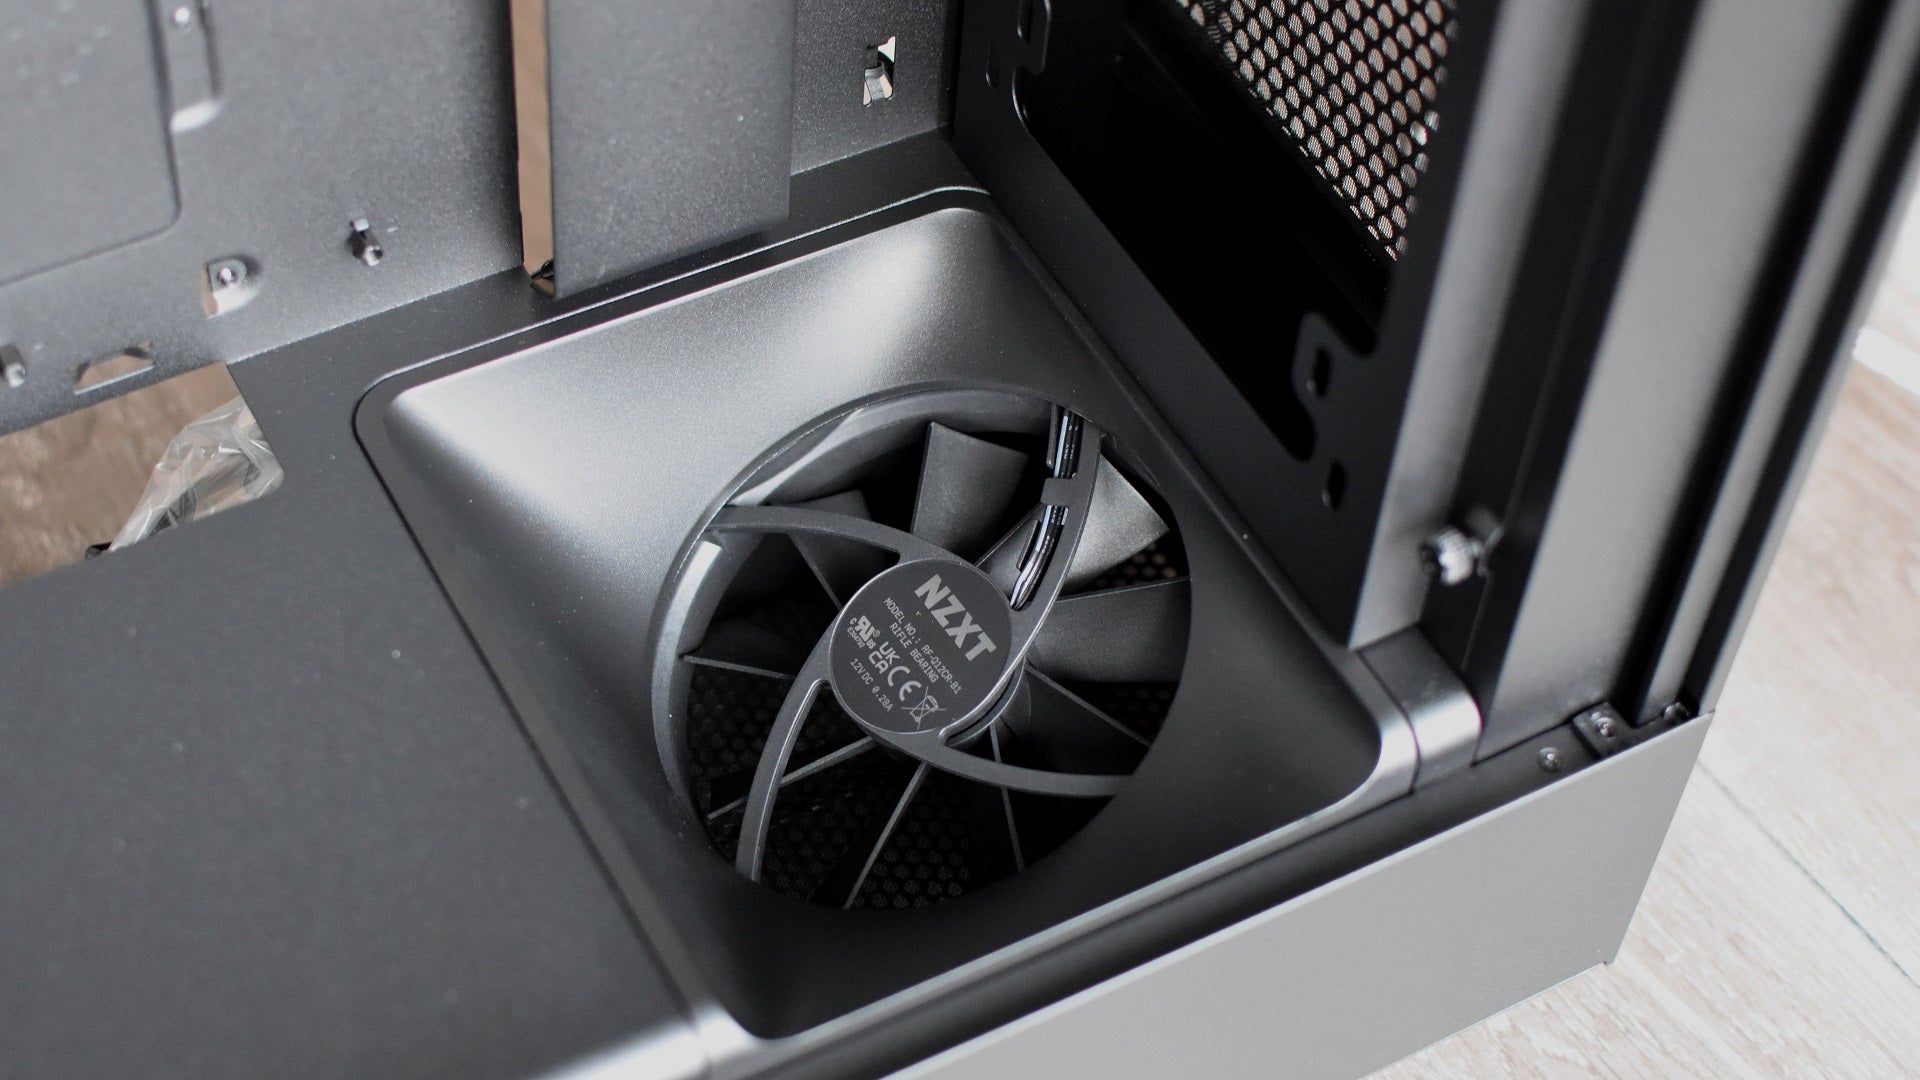 The angled intake fan inside the NZXT H5 Flow chassis.